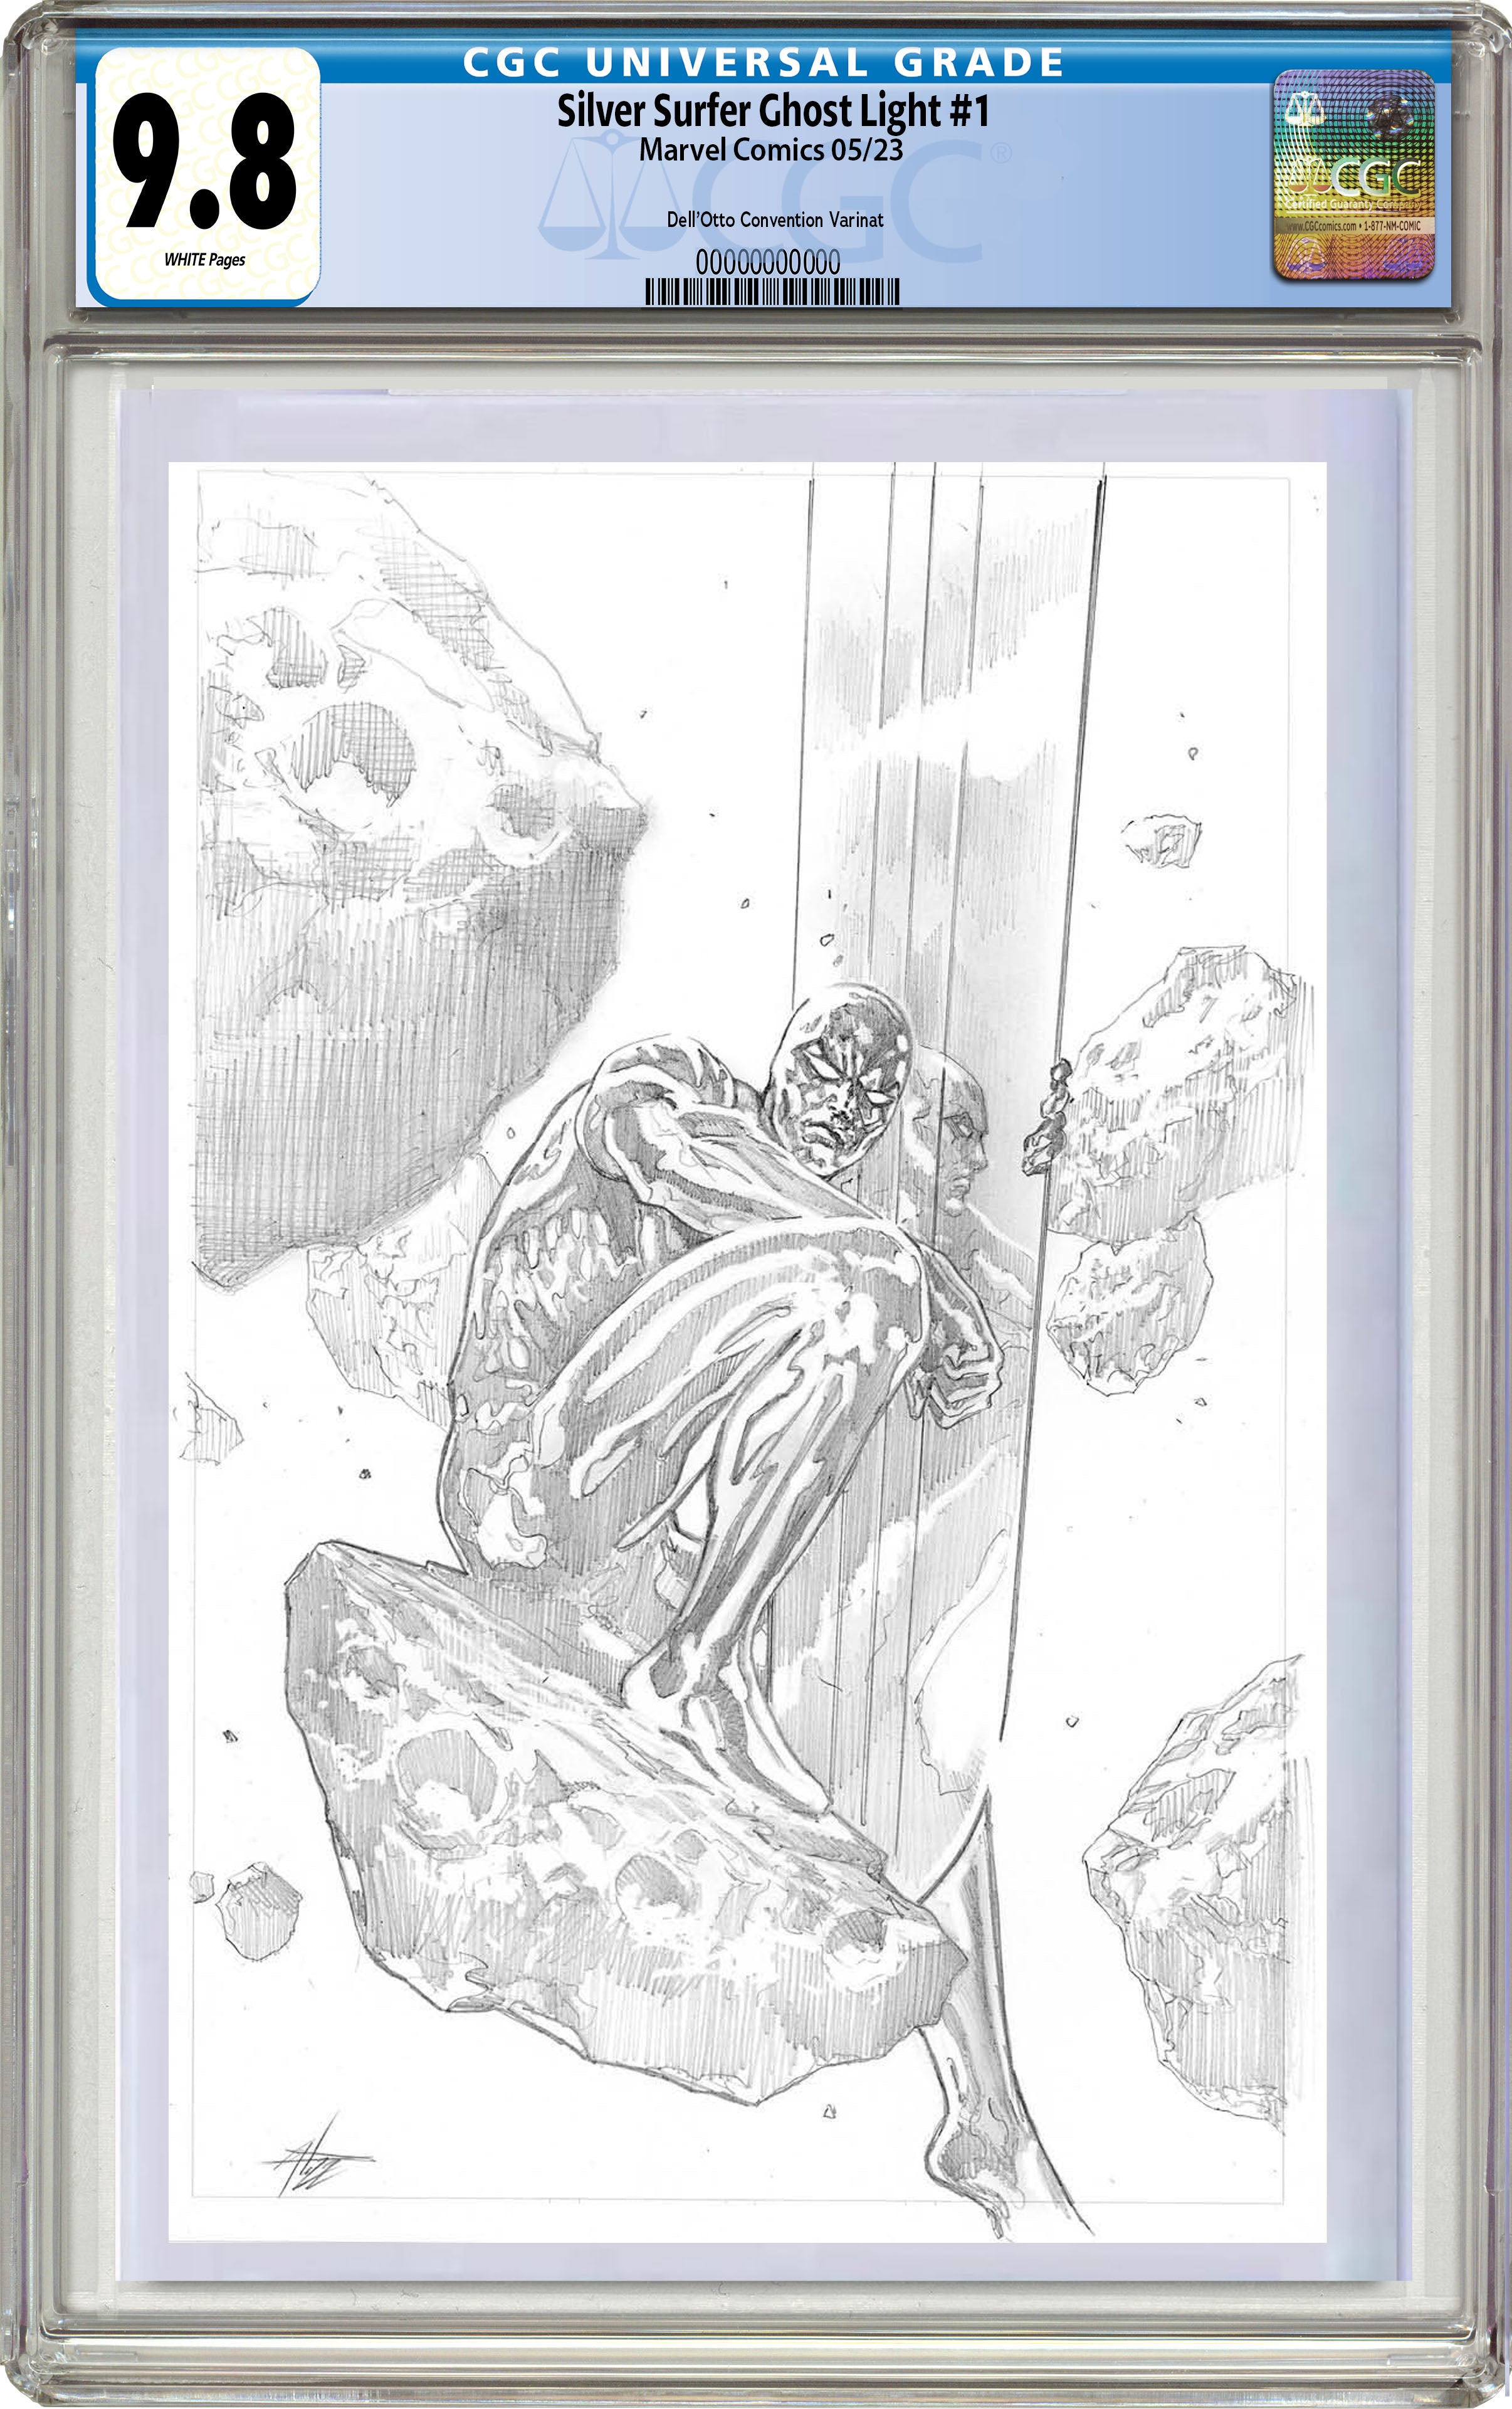 SILVER SURFER GHOST LIGHT #1 GABRIELE DELL'OTTO CONVENTION SKETCH VARIANT OPTIONS